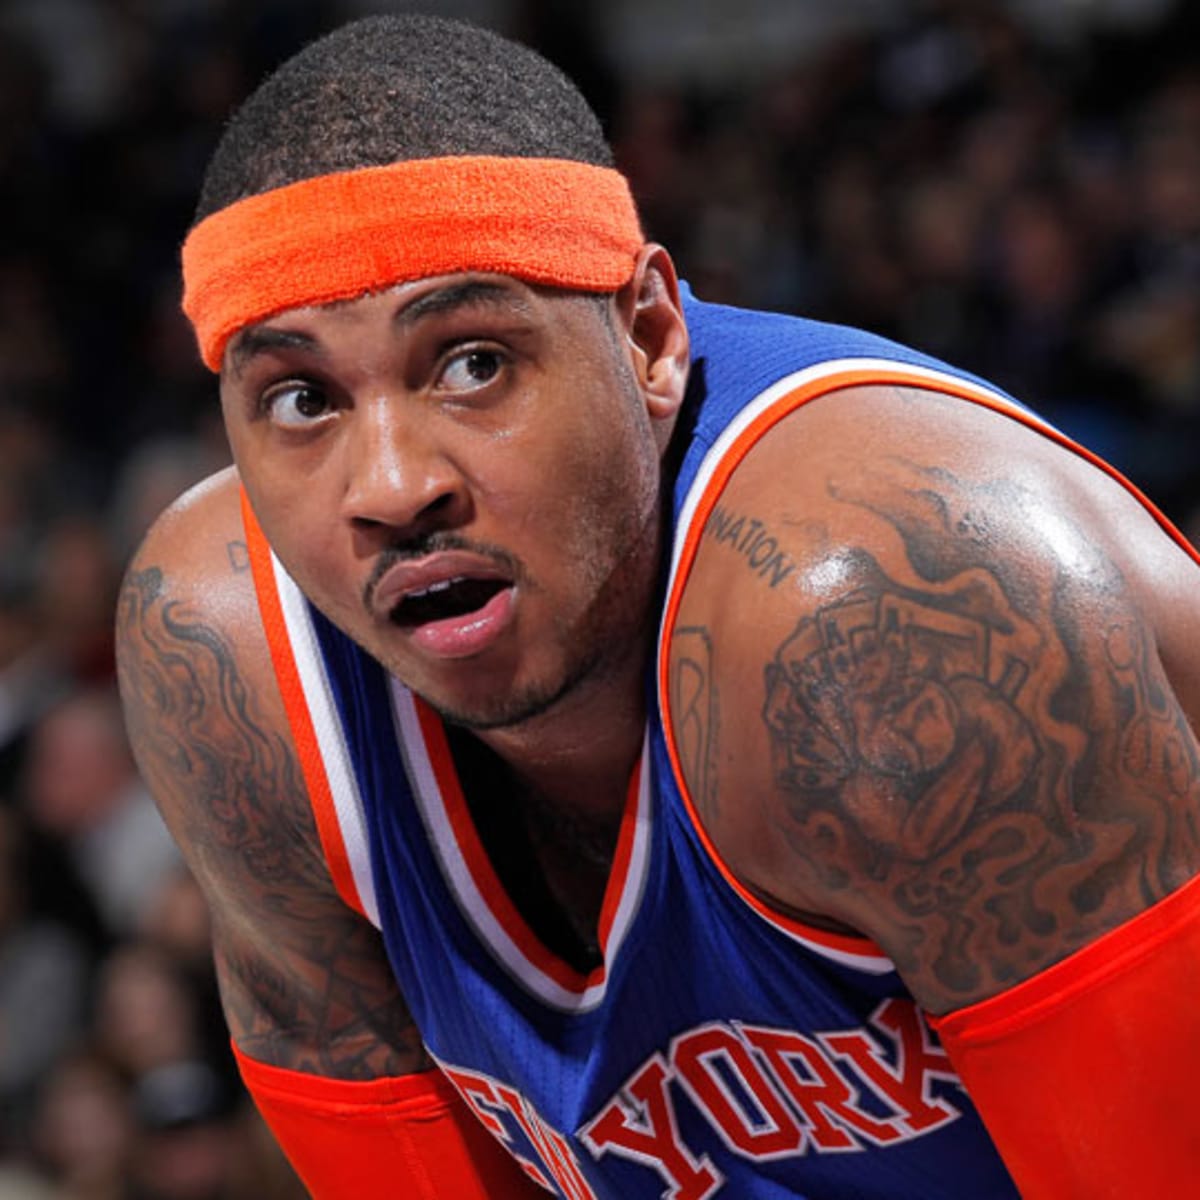 Carmelo Anthony back with 34 points as New York Knicks rock Nuggets, NBA